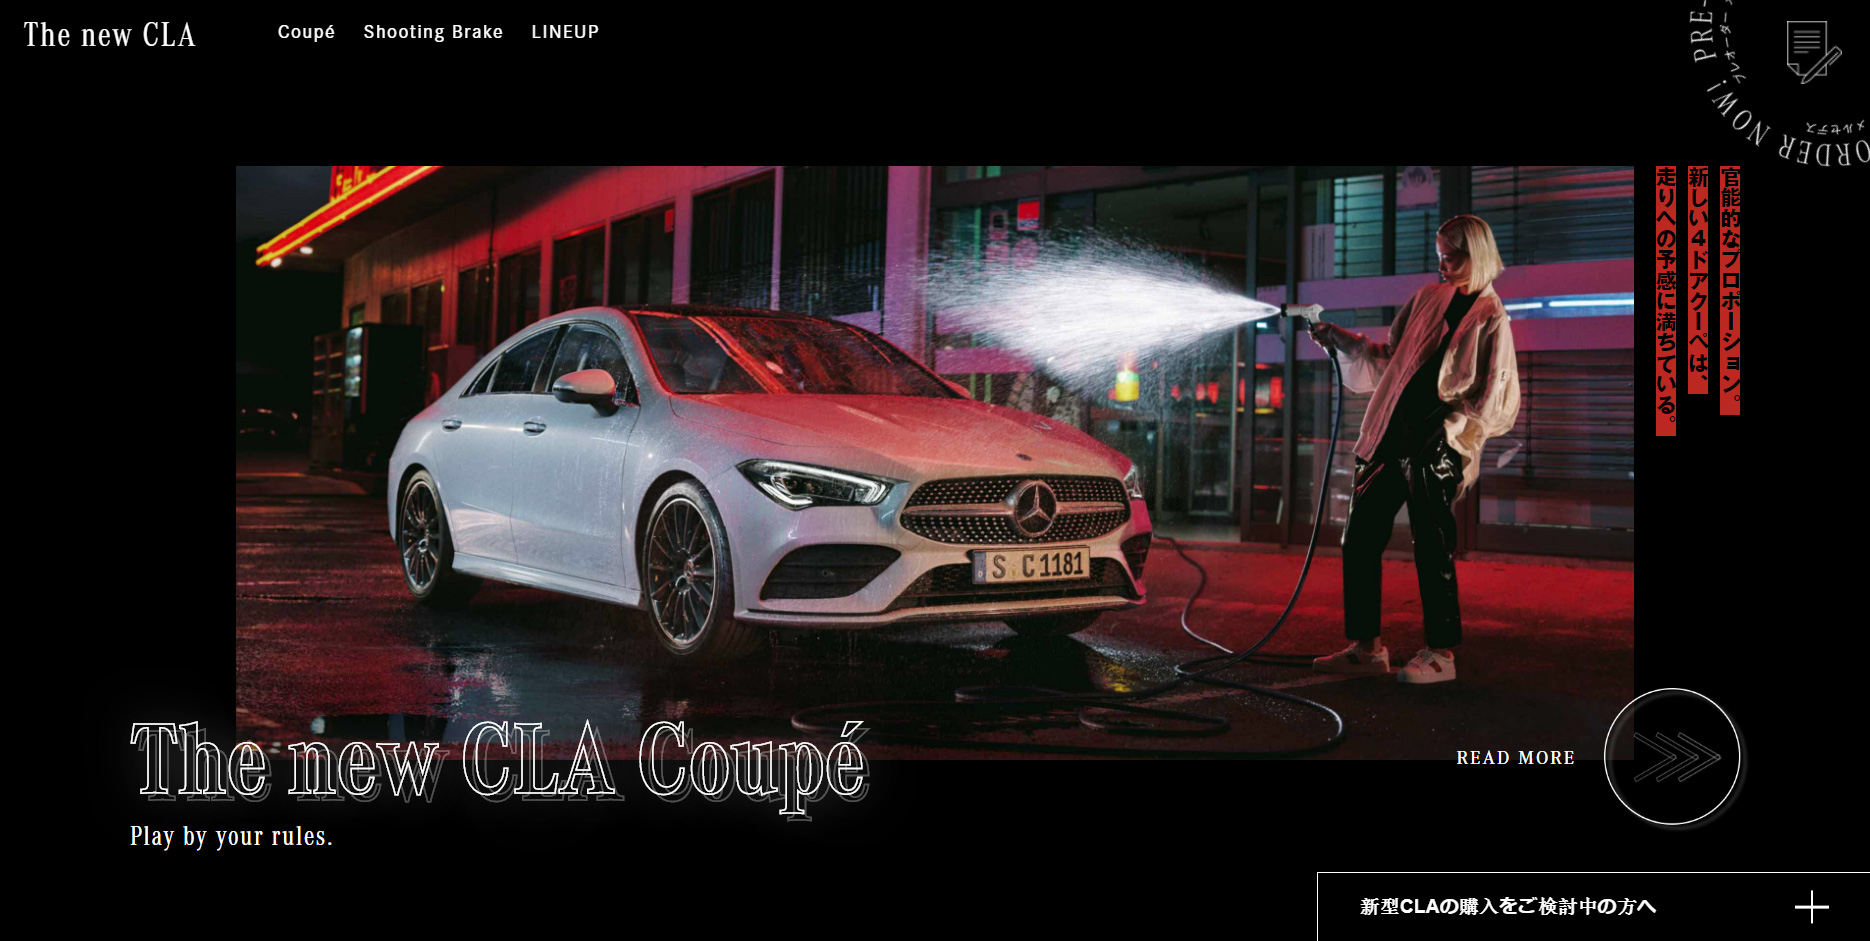 The new CLA. Play by your rules. - Website of the Day